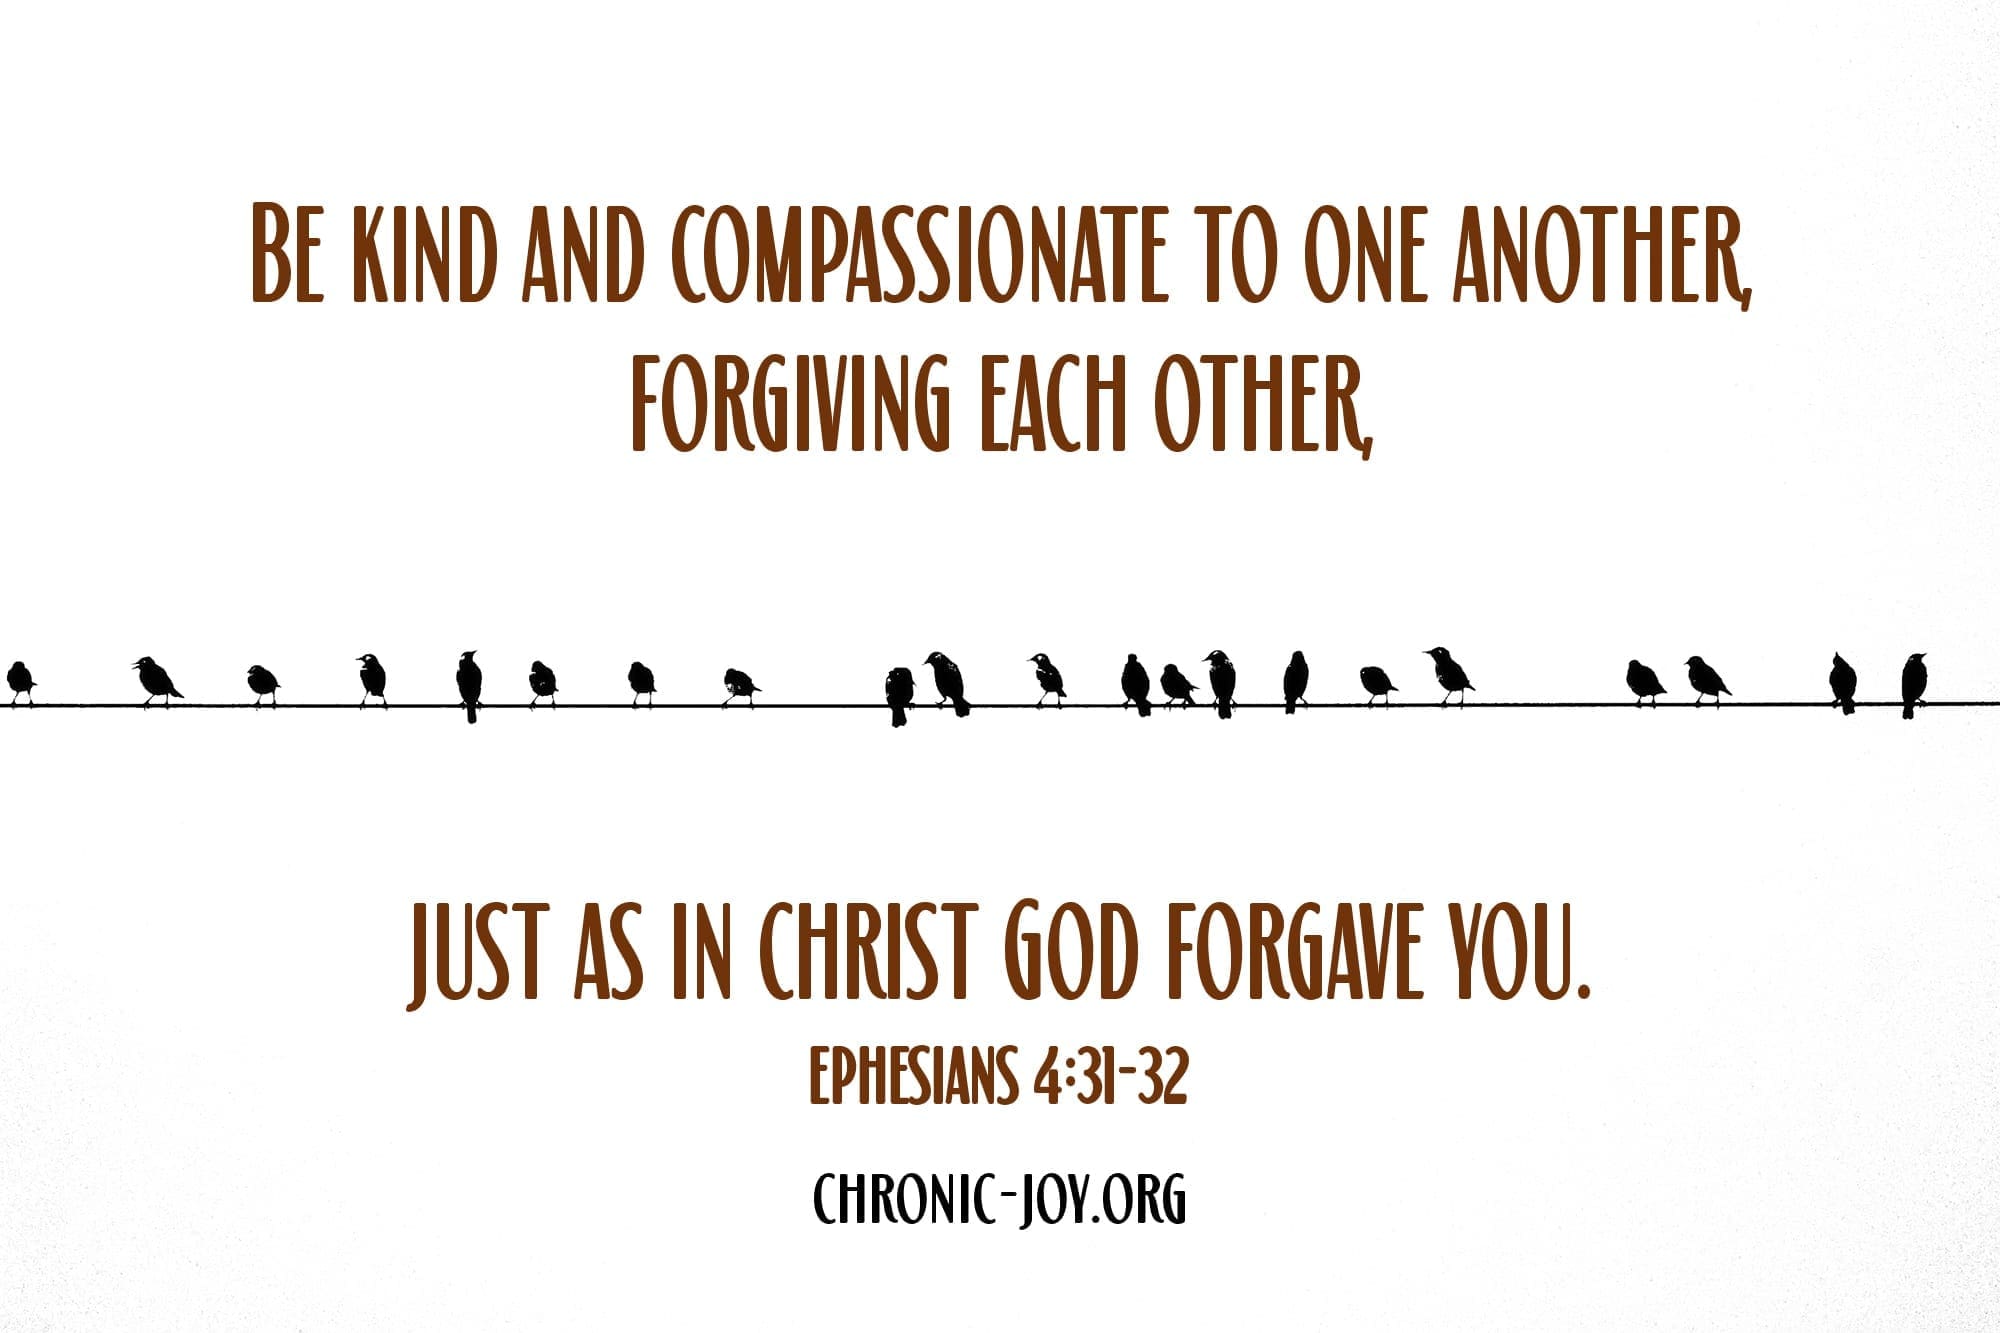 "Be kind and compassionate to one another, forgiving each other, just as in Christ God forgave you." Ephesians 4:31-32